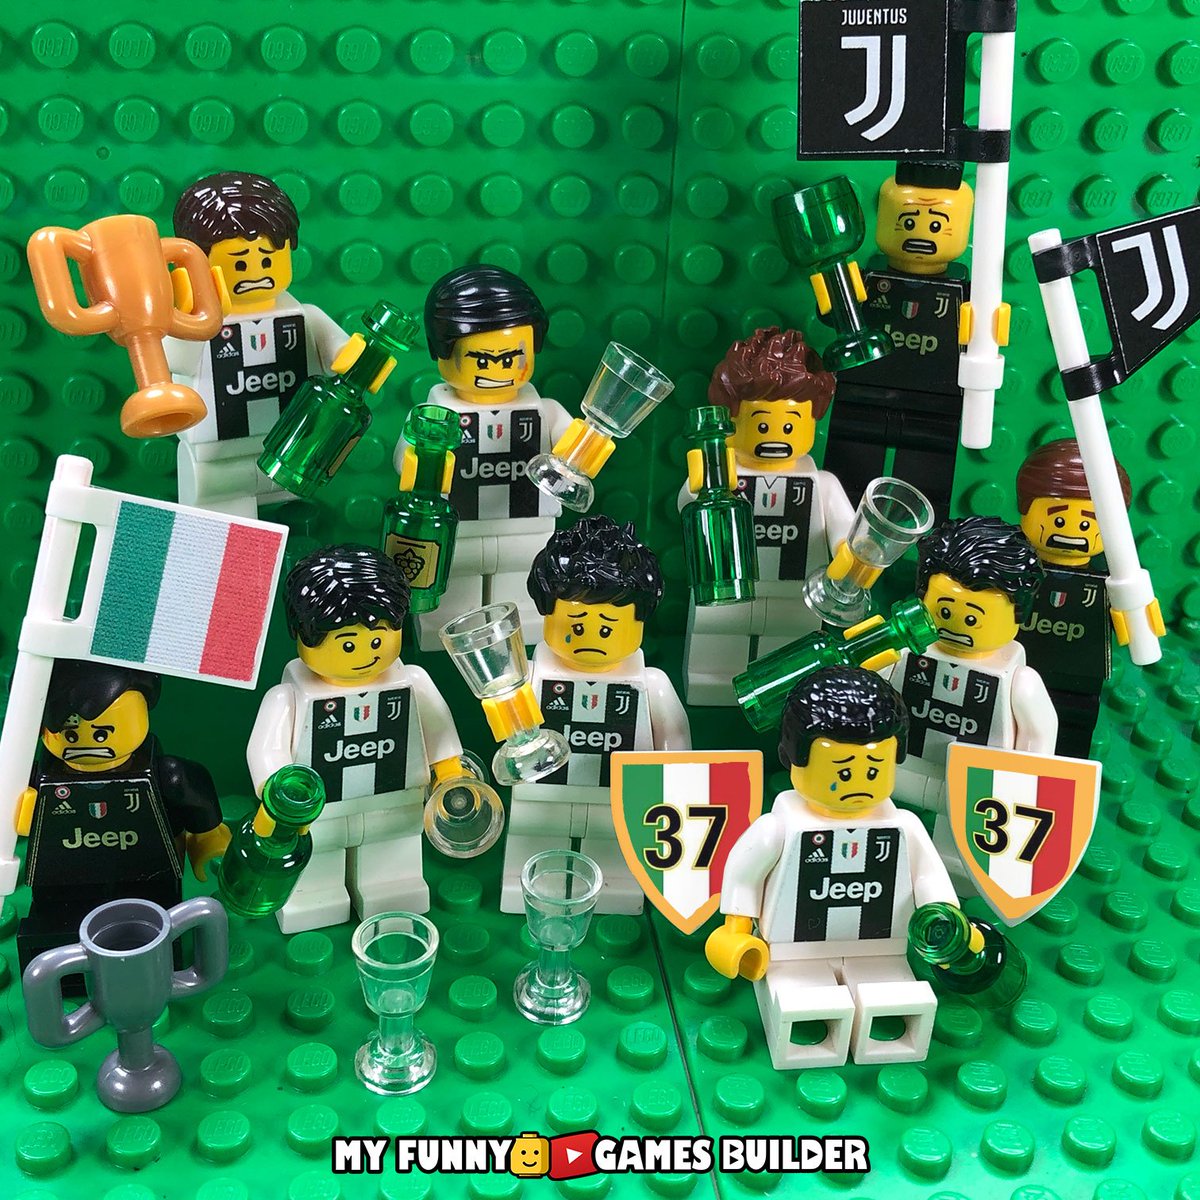 My Funny Games Builder on X: Big Congratulations to #Juventus for winning  the Italian #SeriaA championship by @LegoFootball !  #Ronaldo and #Juve  wins 8th Straight Title!!! #W8NDERFUL #campioneditalia #LEGO  #MyFunnyGamesBuilder